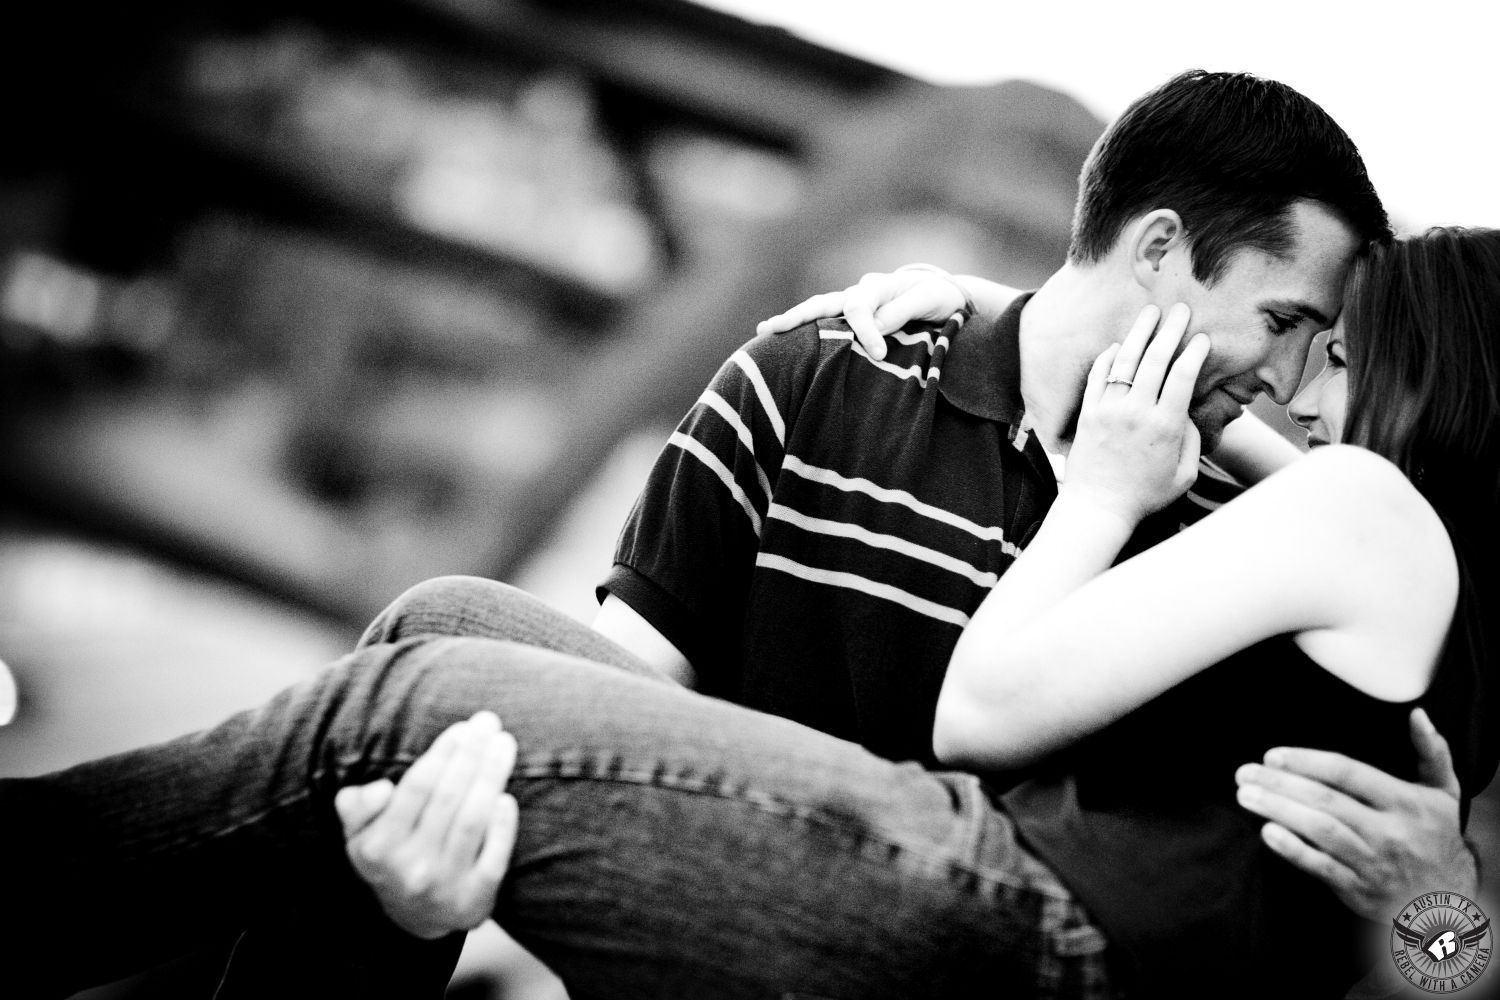 Dark haired girl in a black tank top and dark jeans touches the cheek and smiles at a dark haired guy wearing a dark shirt with white stripes who is picking her up in front of the Pennybacker Bridge in the passionate engagement photo at the 360 Bridge overlook in Austin Texas.